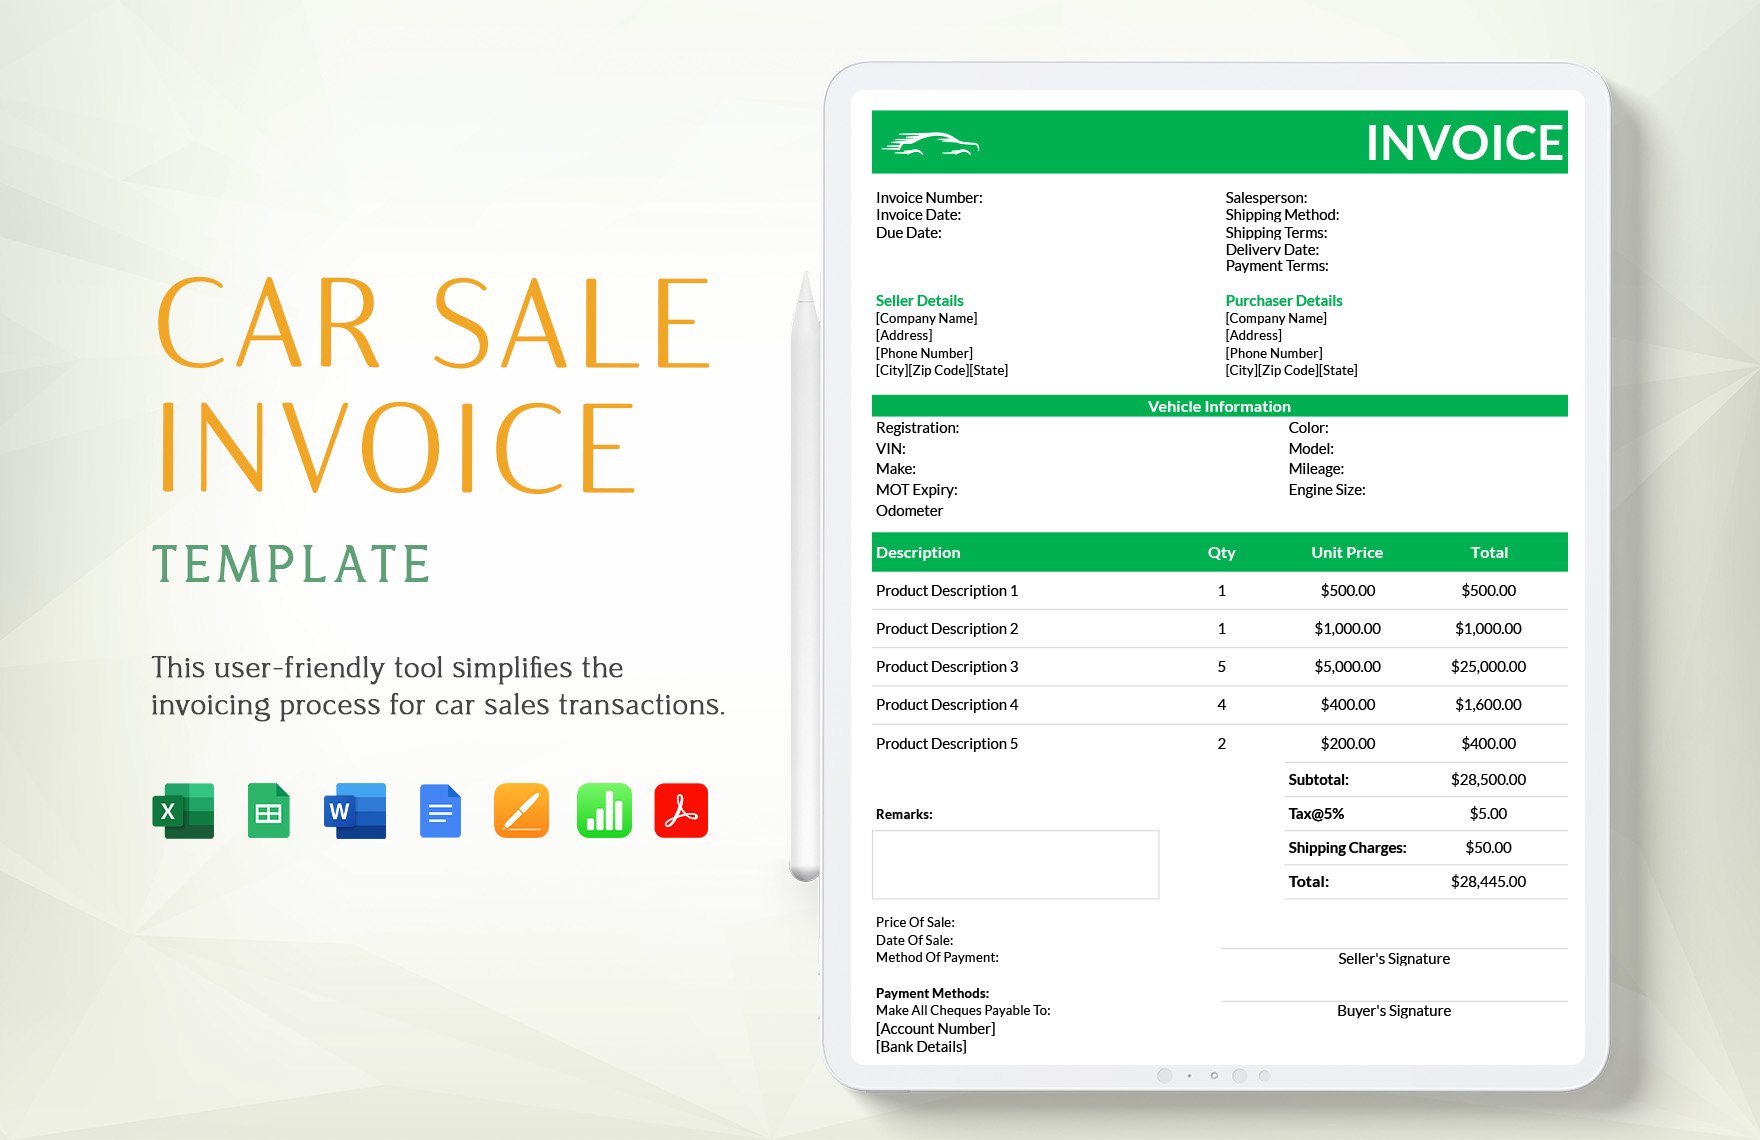 Car Sale Invoice Template in Word, Google Docs, Excel, PDF, Google Sheets, Apple Pages, Apple Numbers